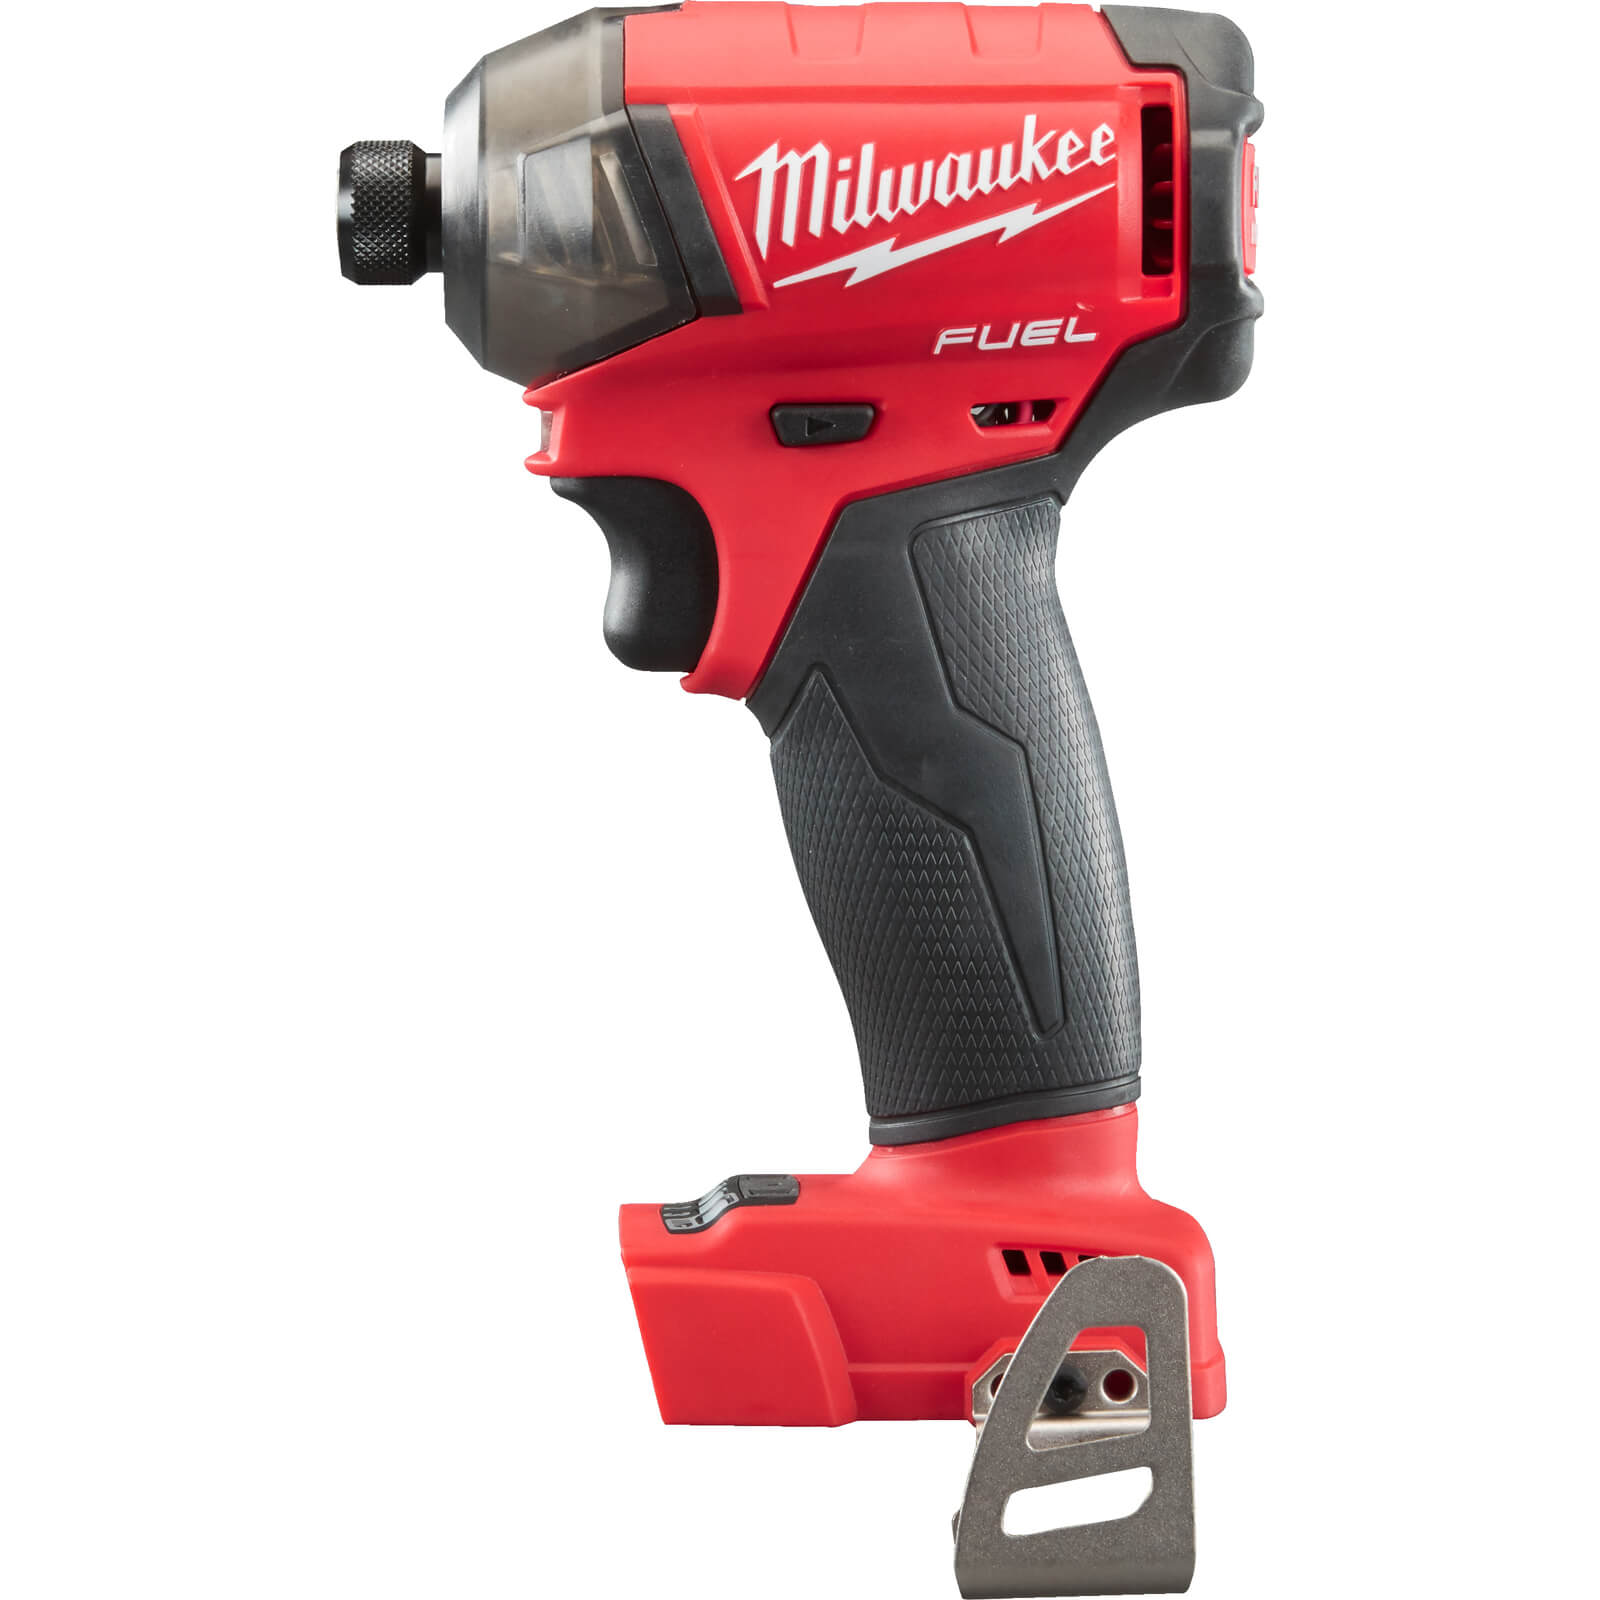 Image of Milwaukee M18 FQID Fuel 18v Cordless Brushless Surge Hydraulic Impact Driver No Batteries No Charger No Case